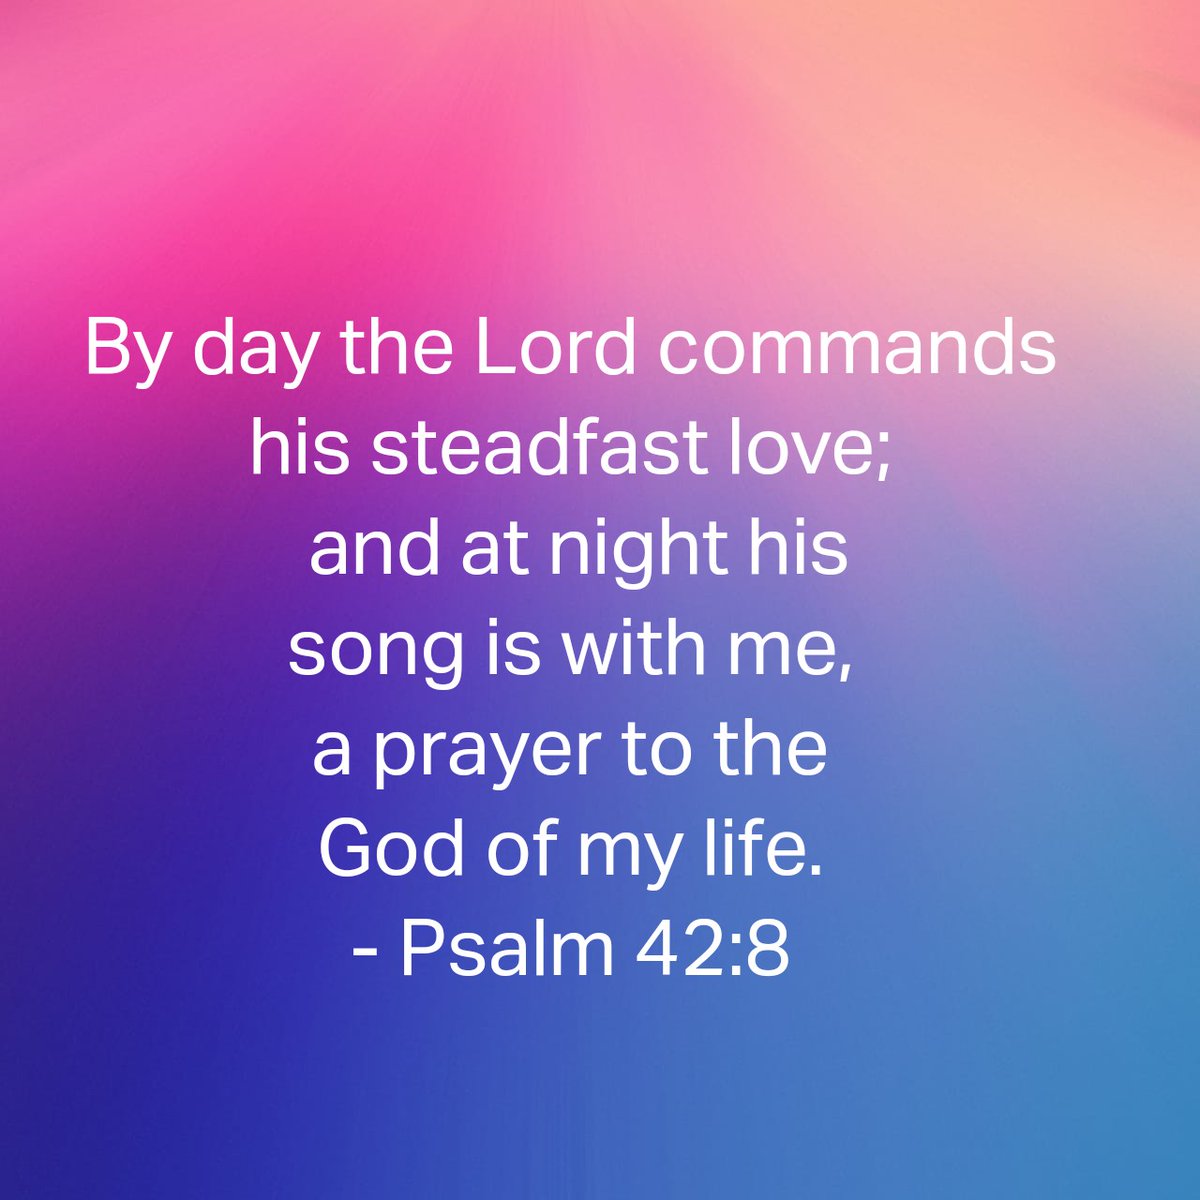 Good night, Patriots. Sleep well. We need our rest. Times are hard, and our rights are under attack. Pray that more and more come to know their need to turn from wickedness to the One source of goodness and light. Here a good verse to meditate on: 'By day the Lord commands…